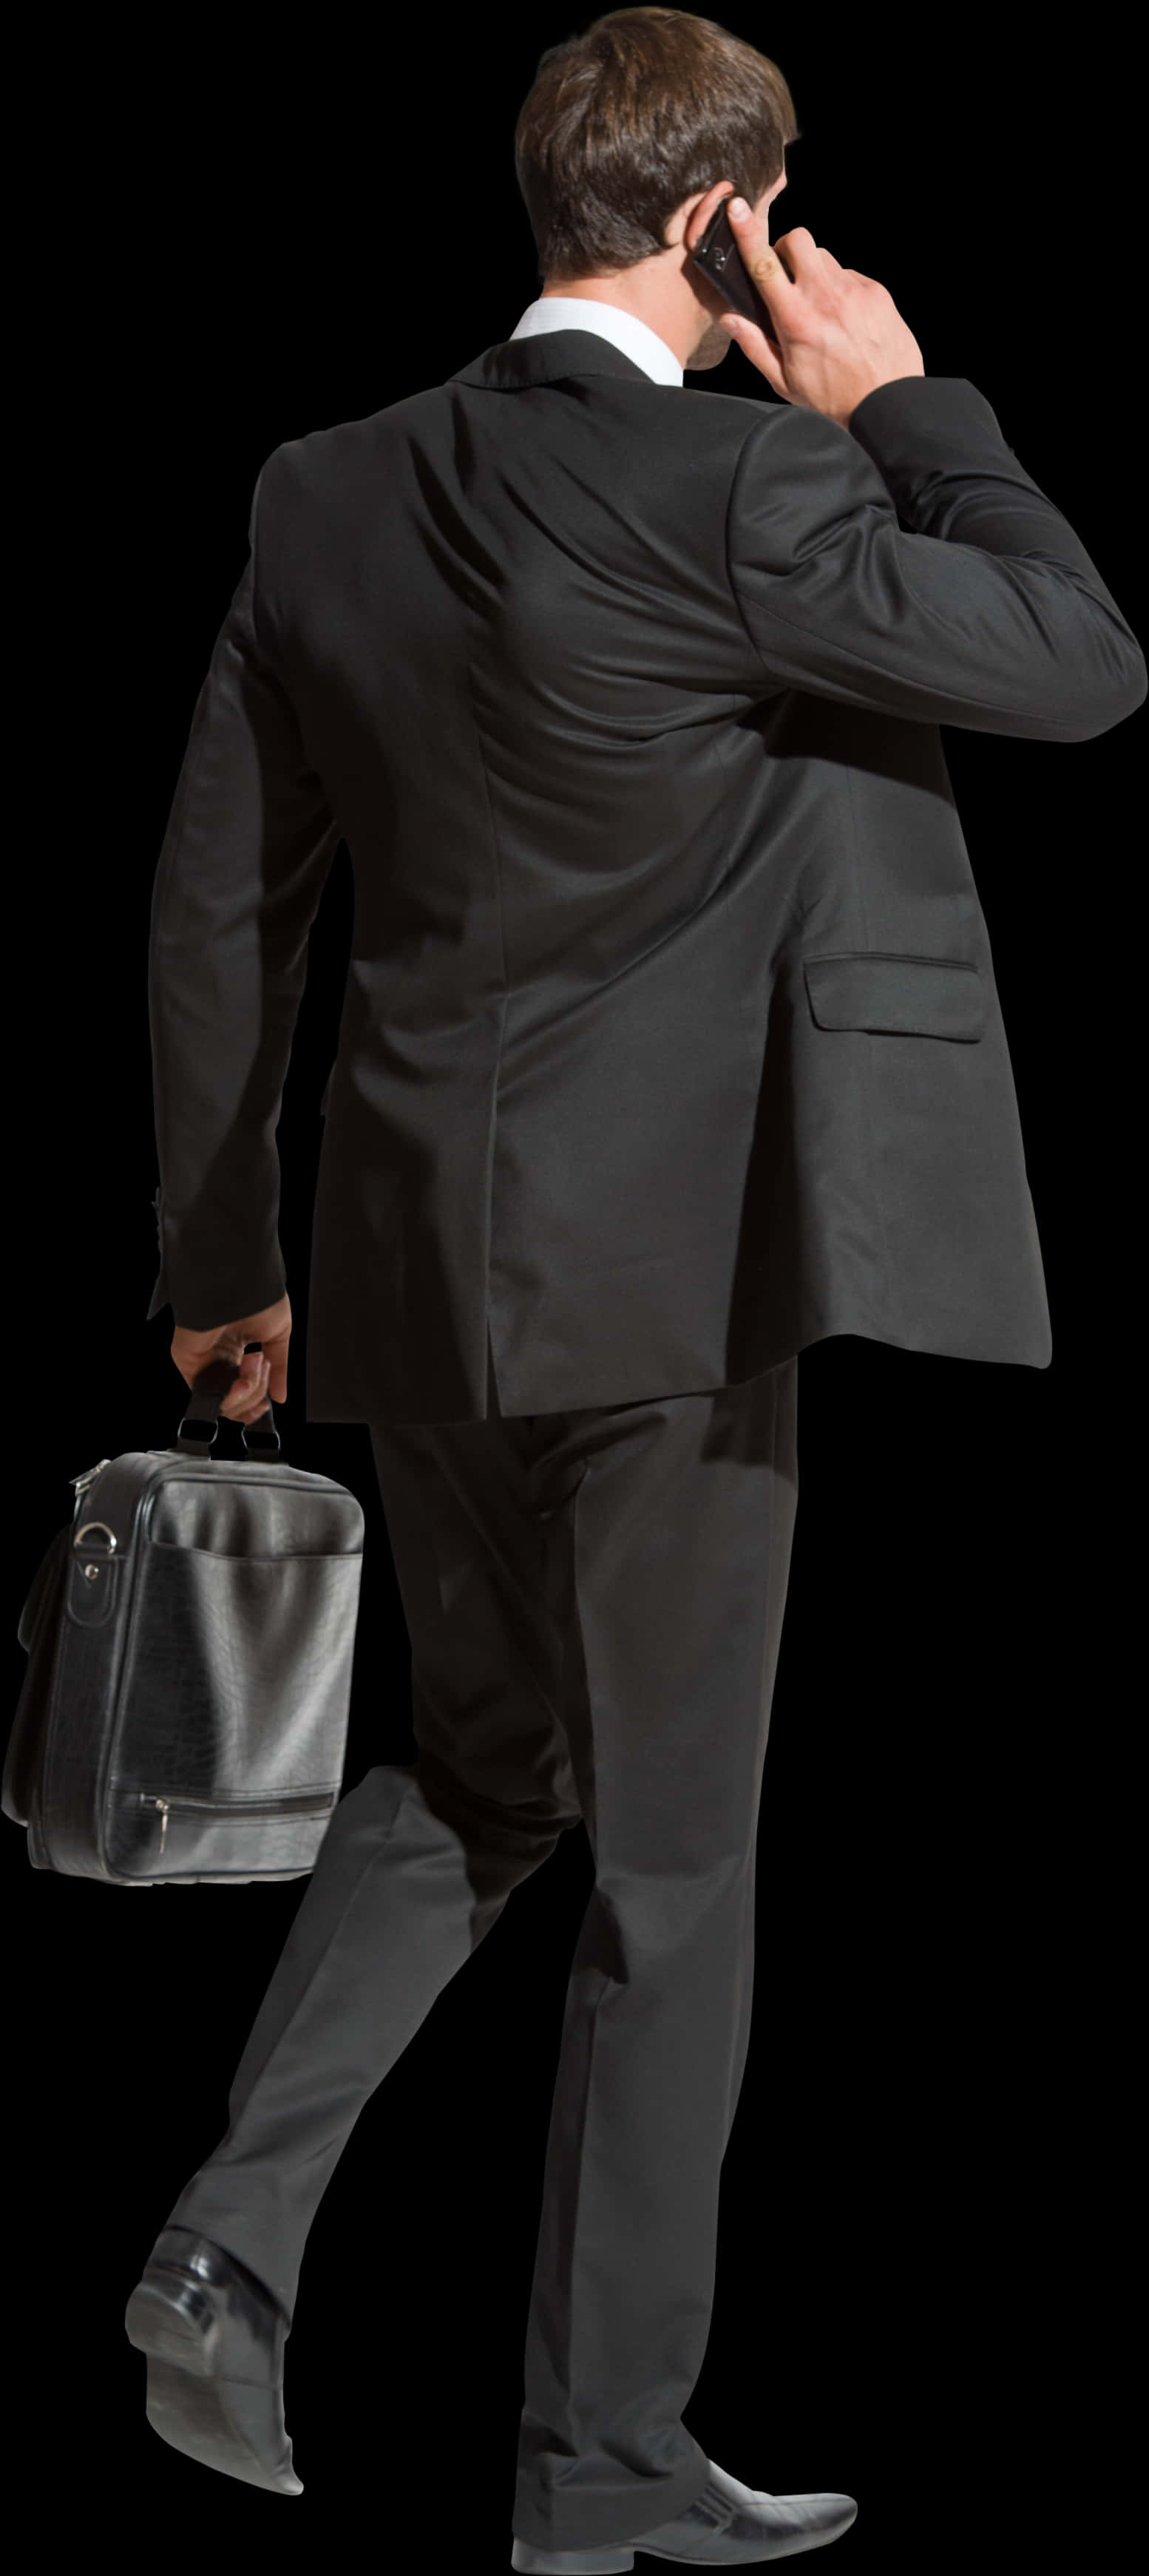 A Man In A Suit Carrying A Suitcase